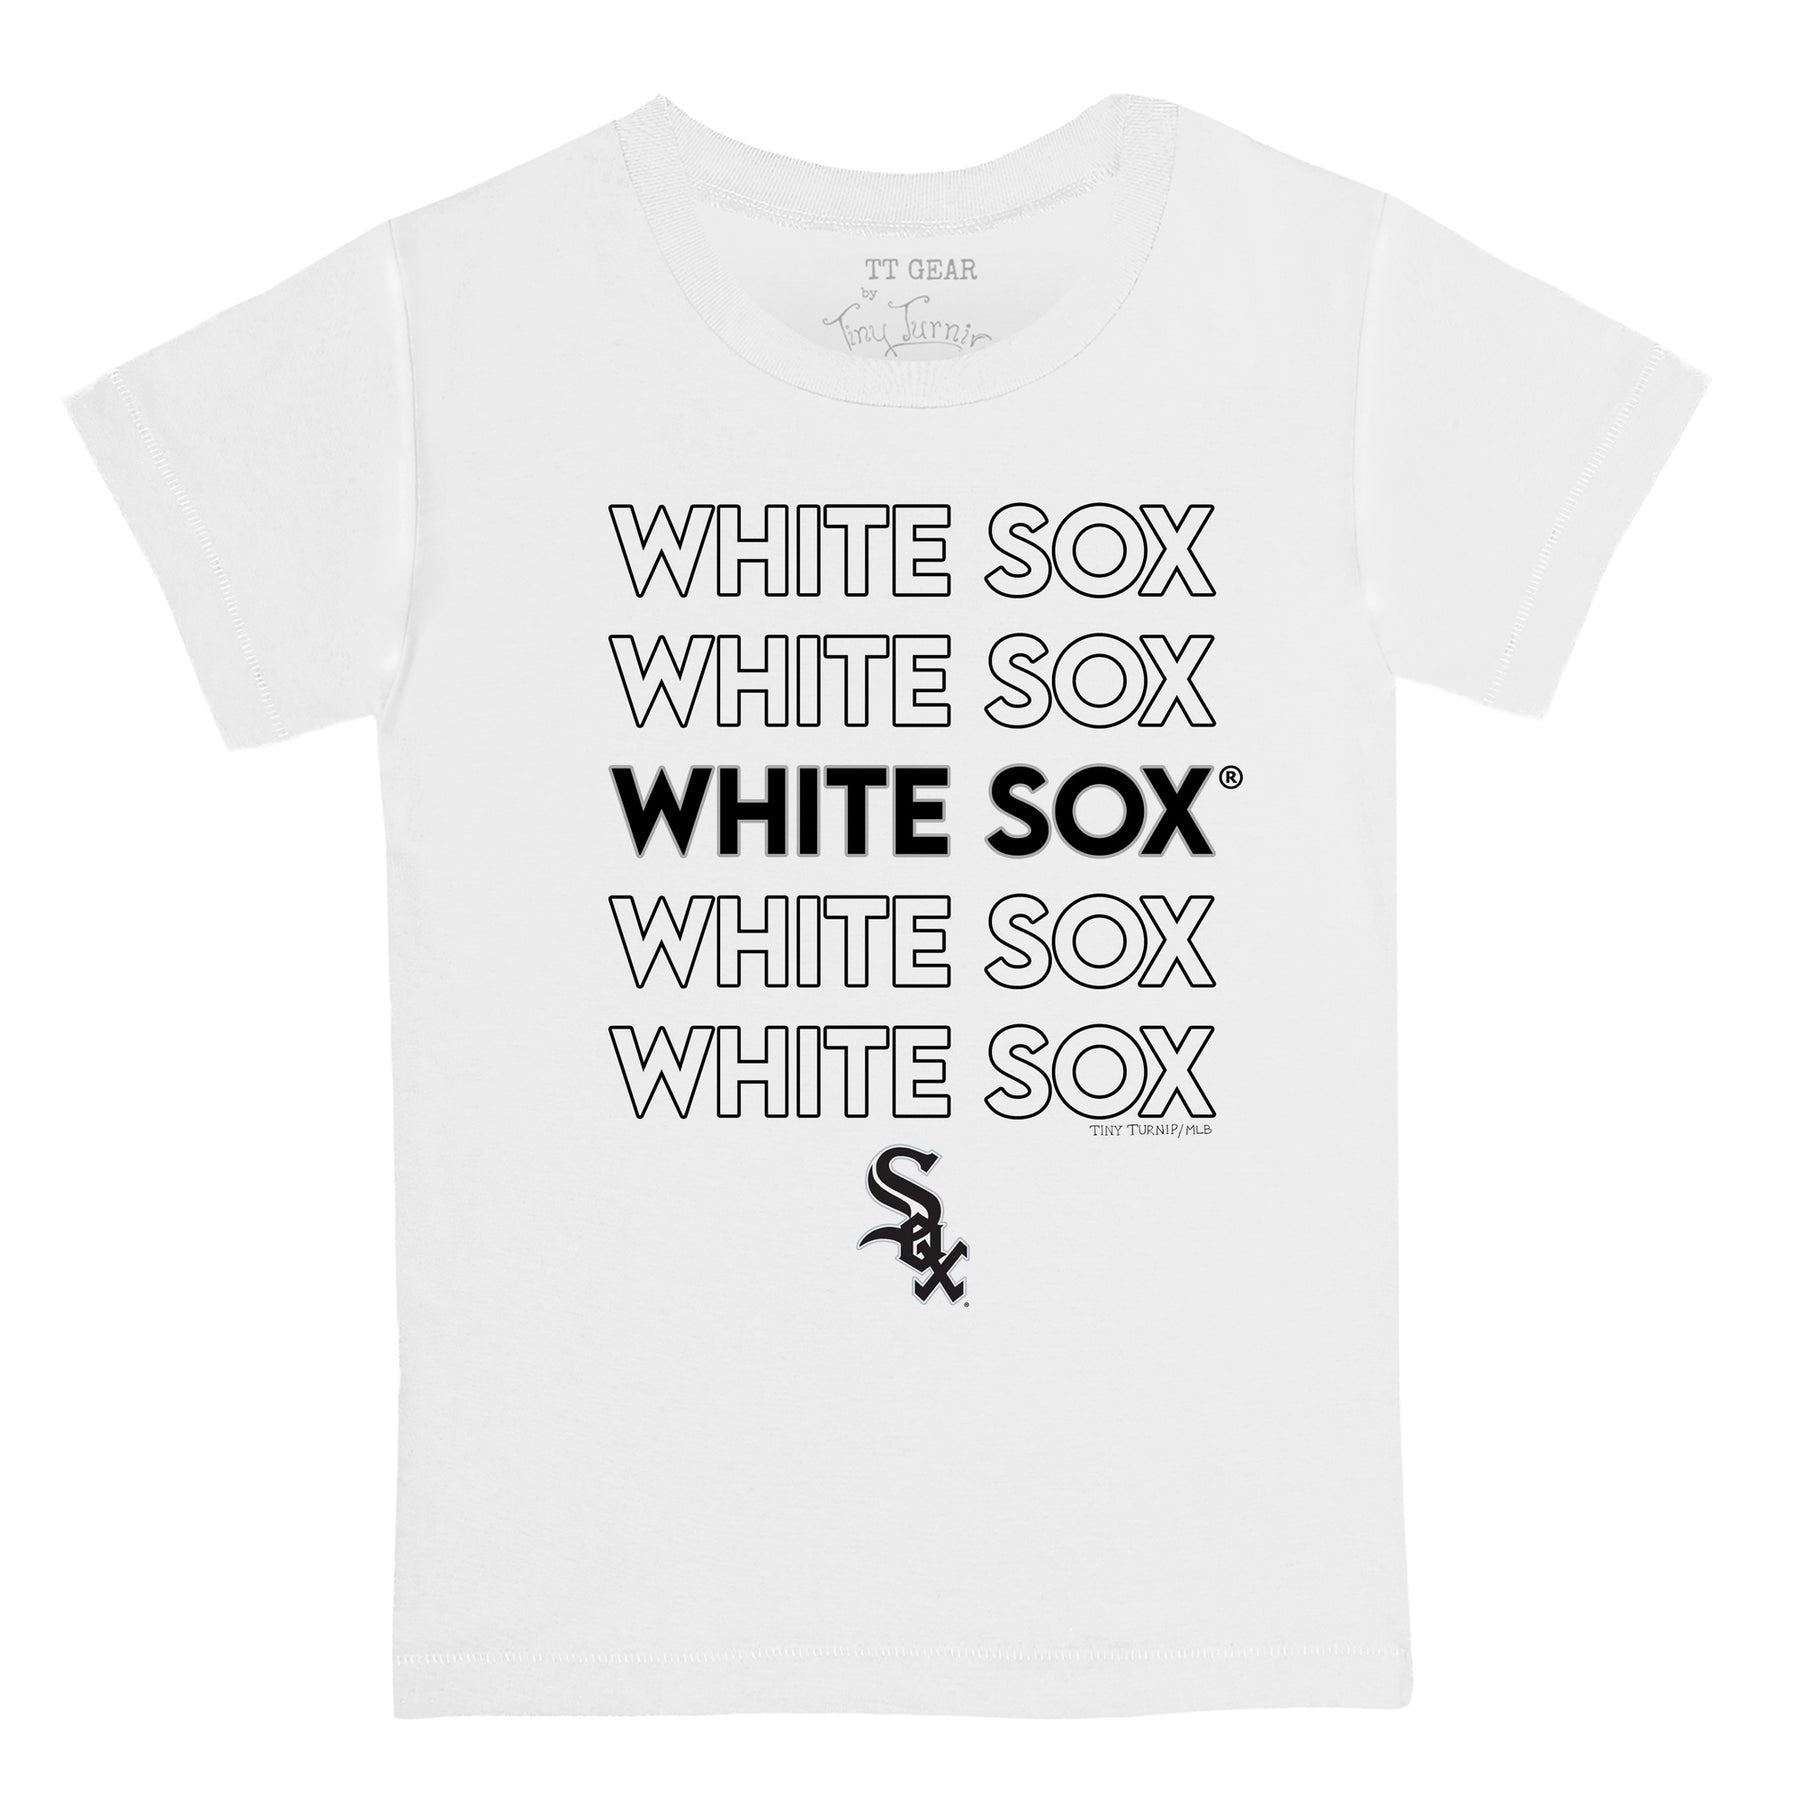 Chicago White Sox Stacked Tee Shirt